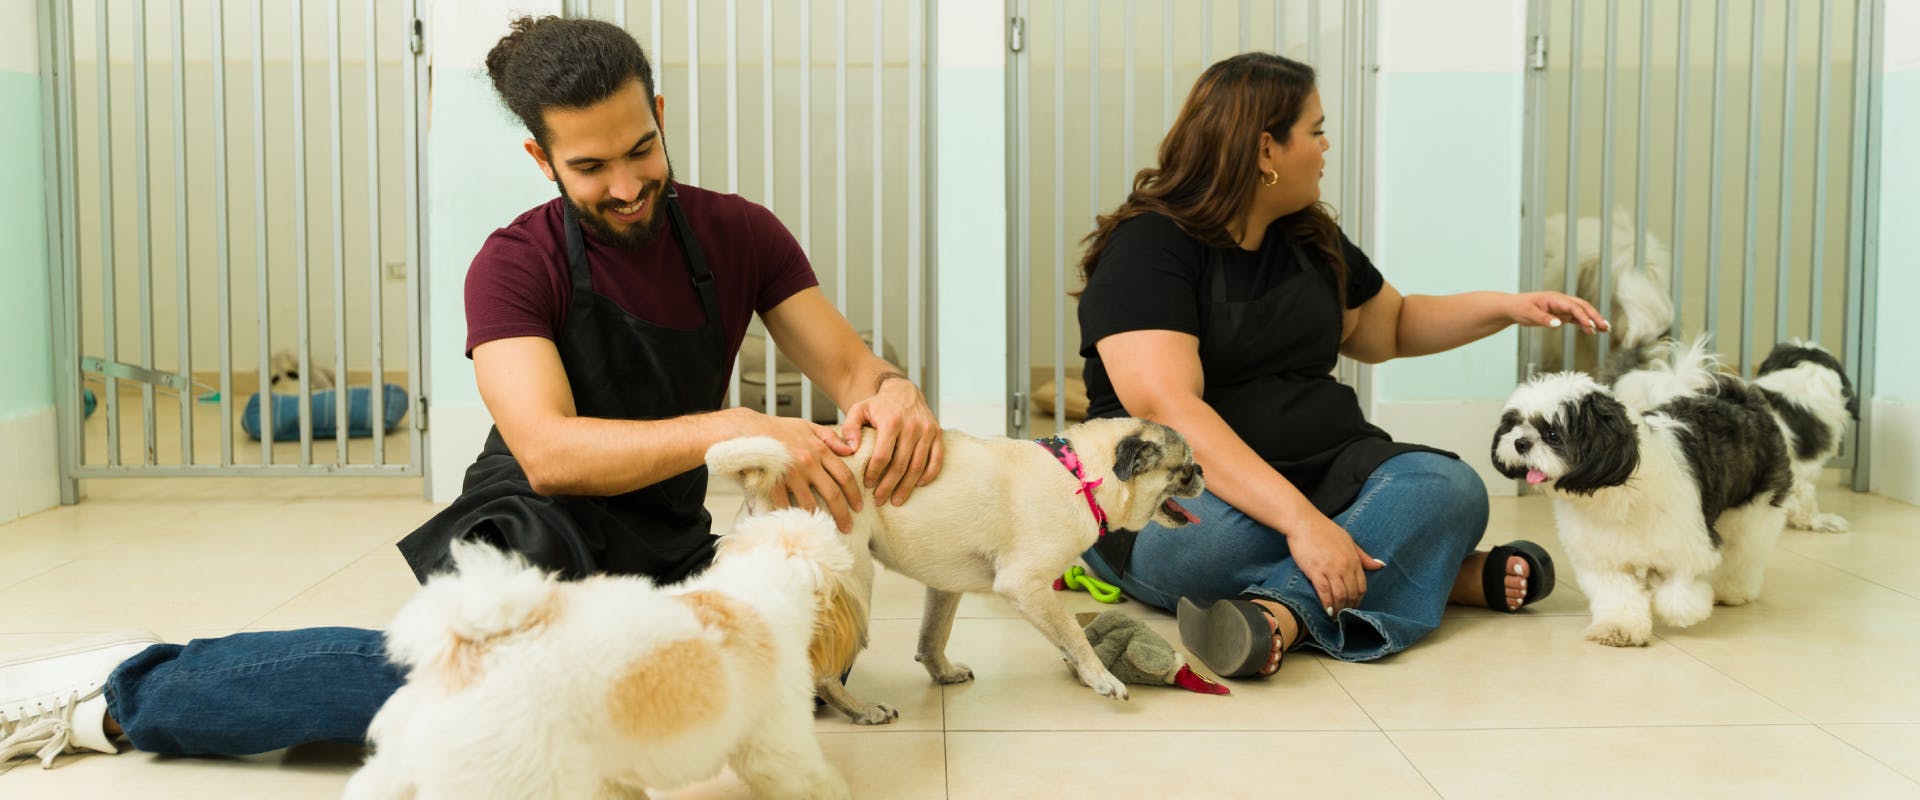 two doggy daycare staff members playing with a pack of small dogs at a daycare for dogs center